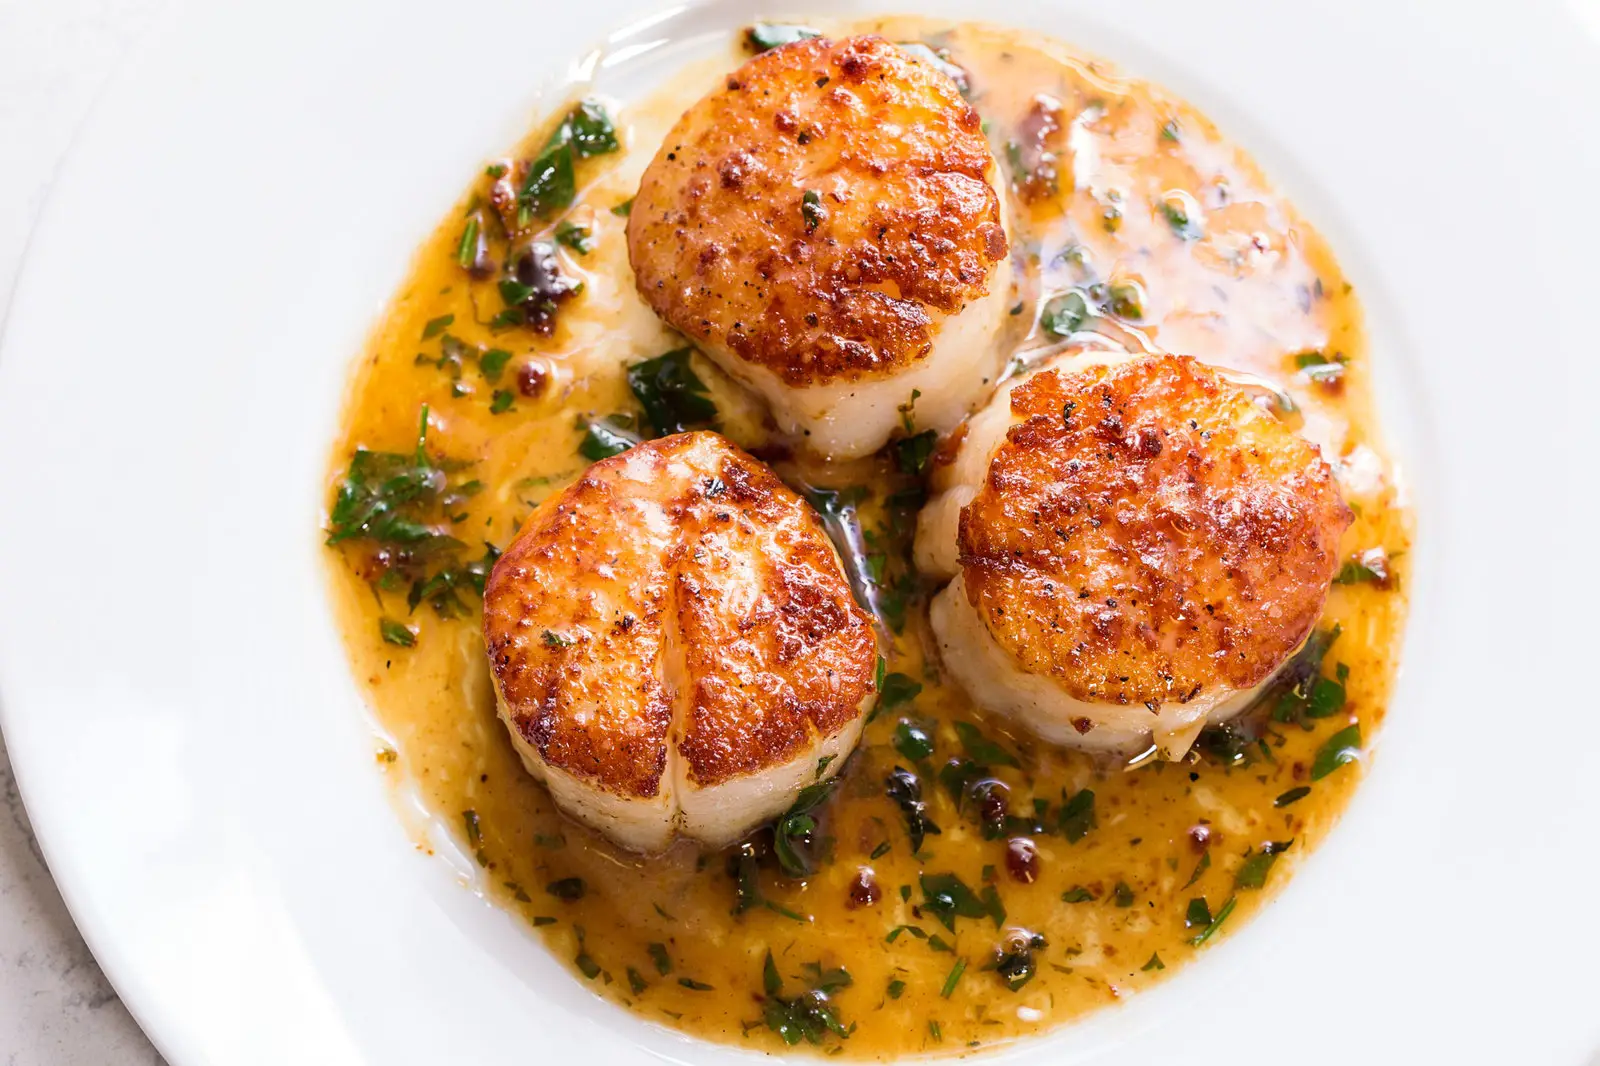 Why are Scallops So Expensive?